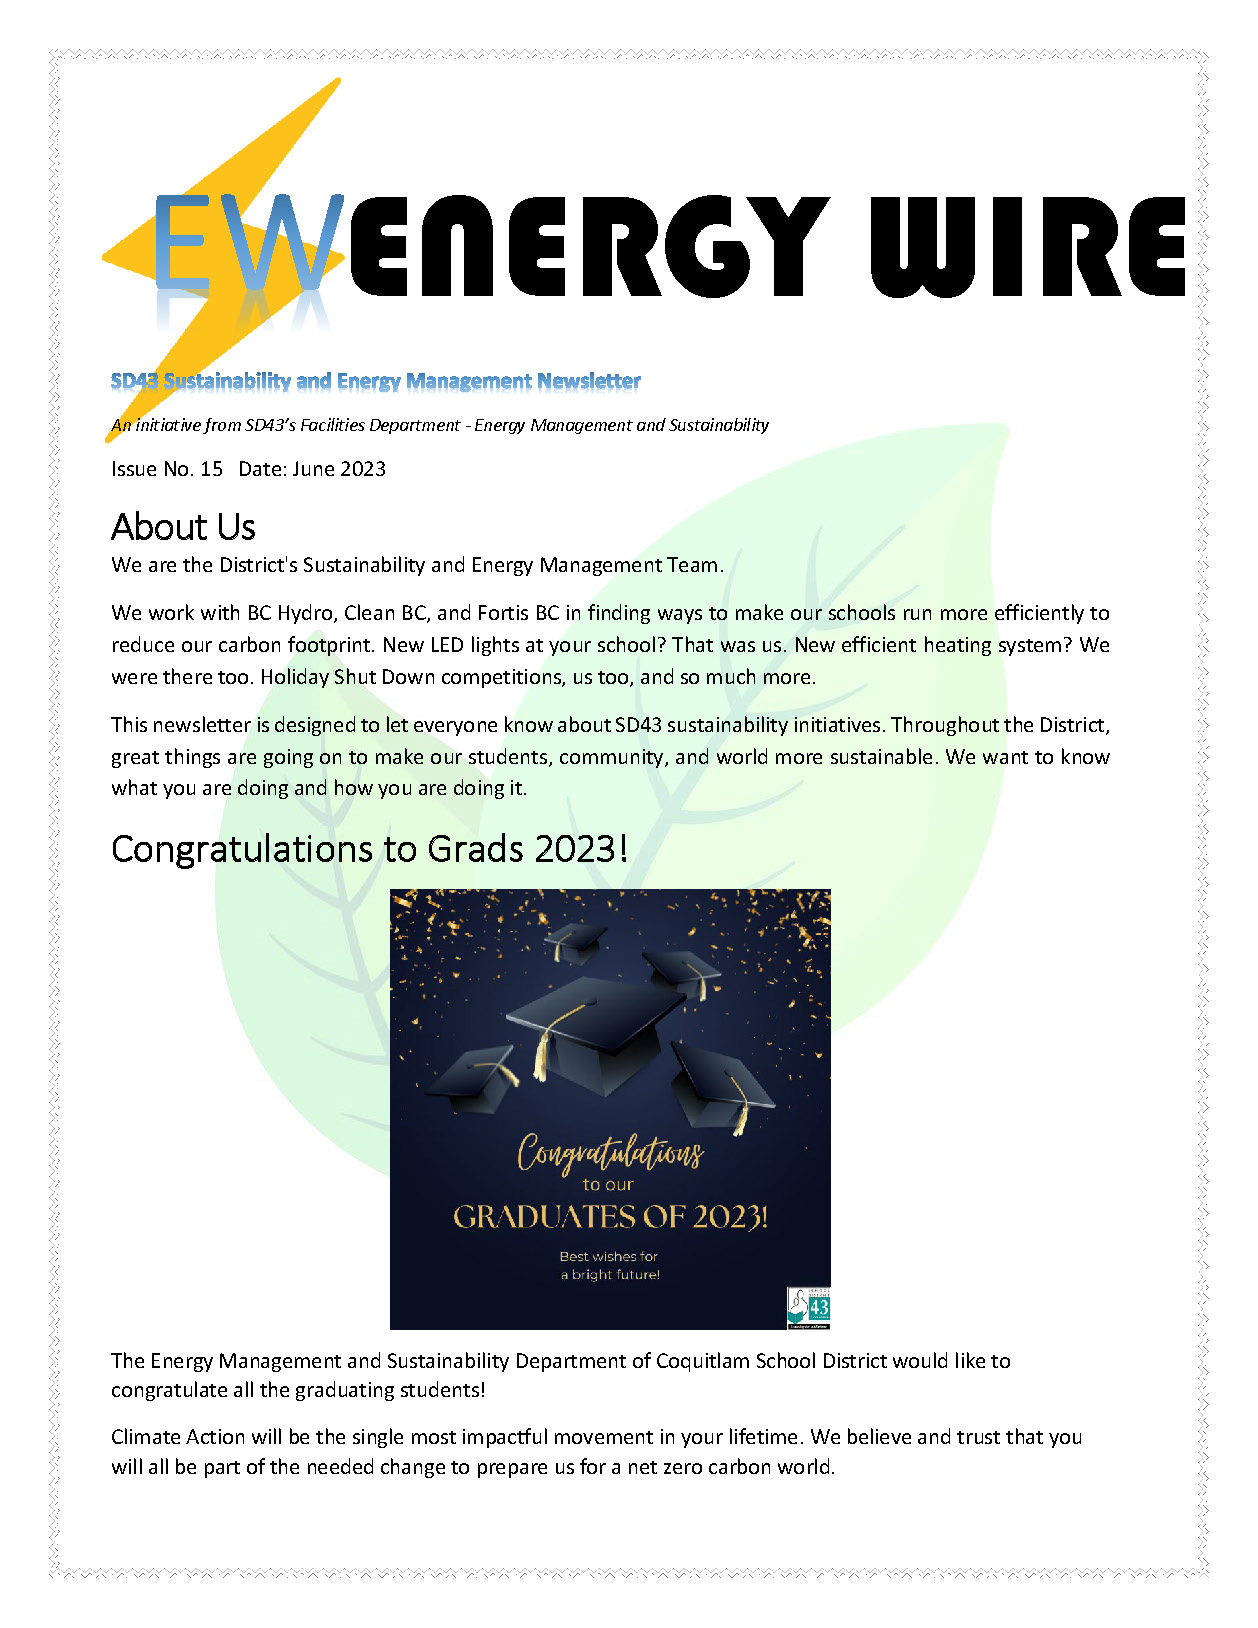 Energy Wire Newsletter June 2023_Page_1.jpg